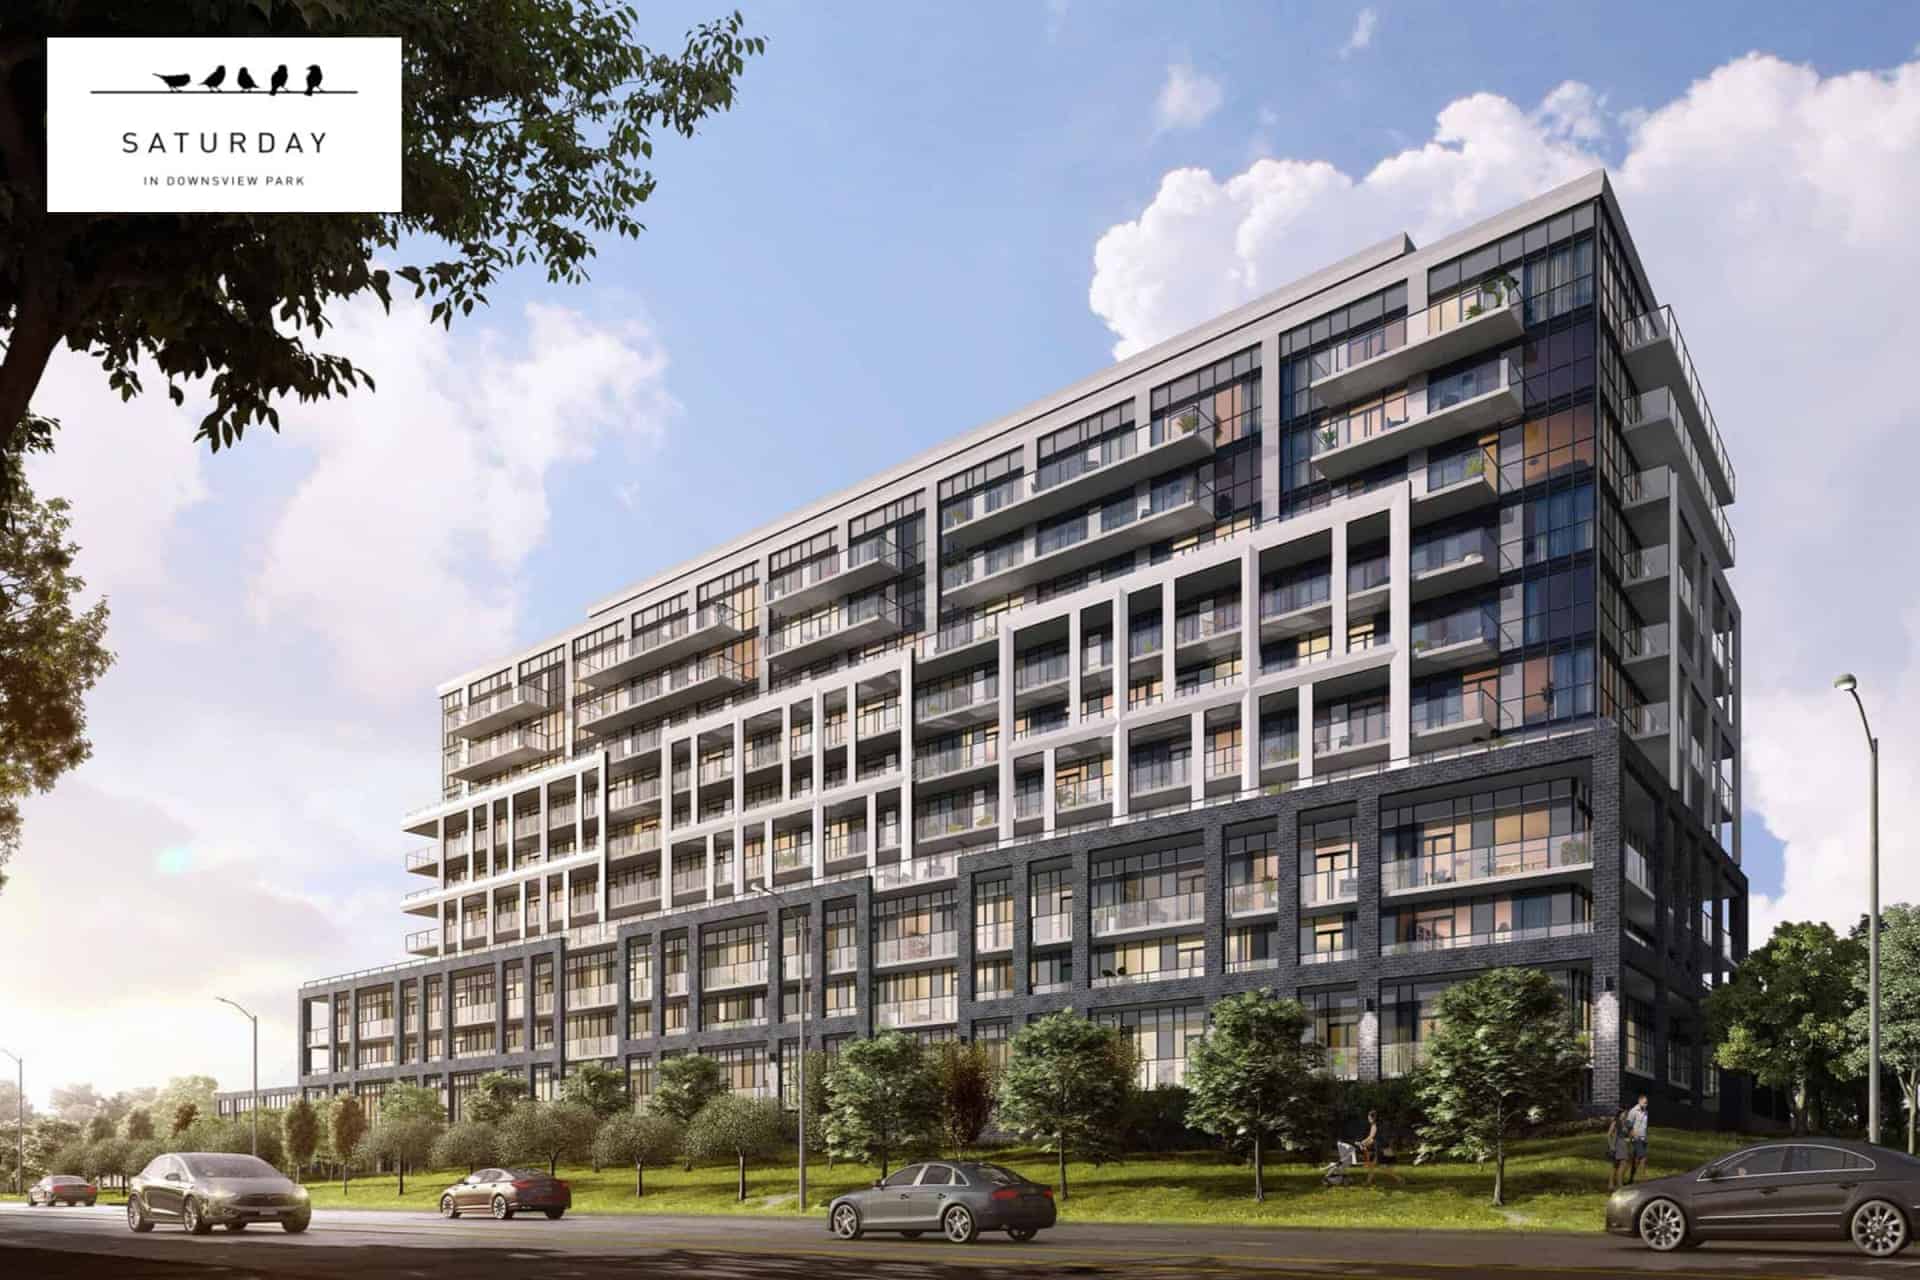 SATURDAY IN DOWNSVIEW PARK PHASE 2